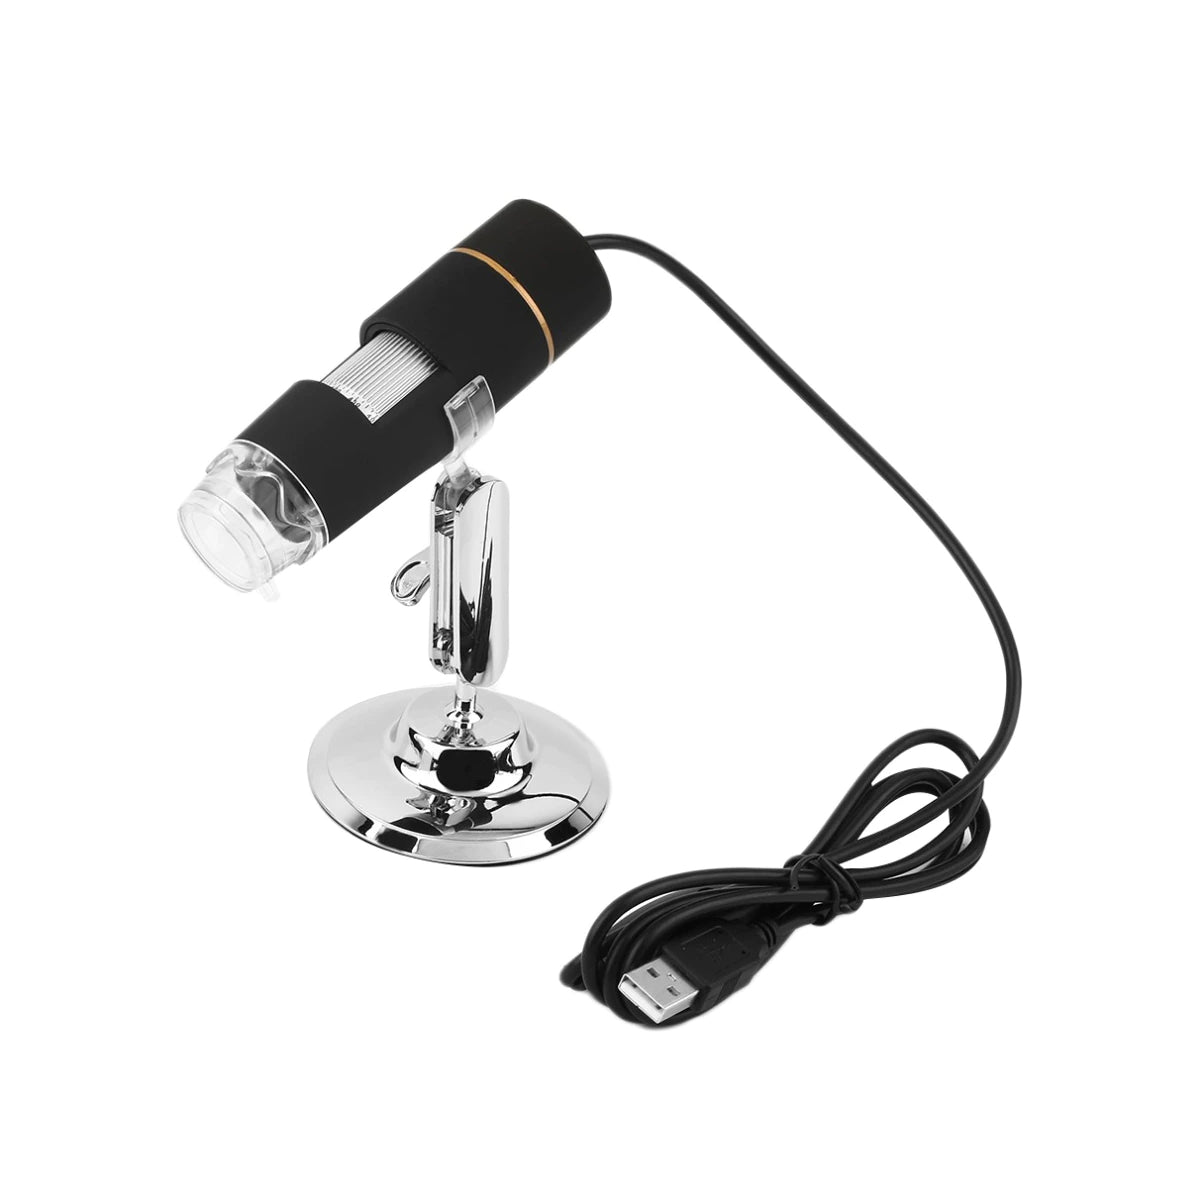 Digital 50-500X Microscope Video Camera, 2MP with USB 3.0 connector